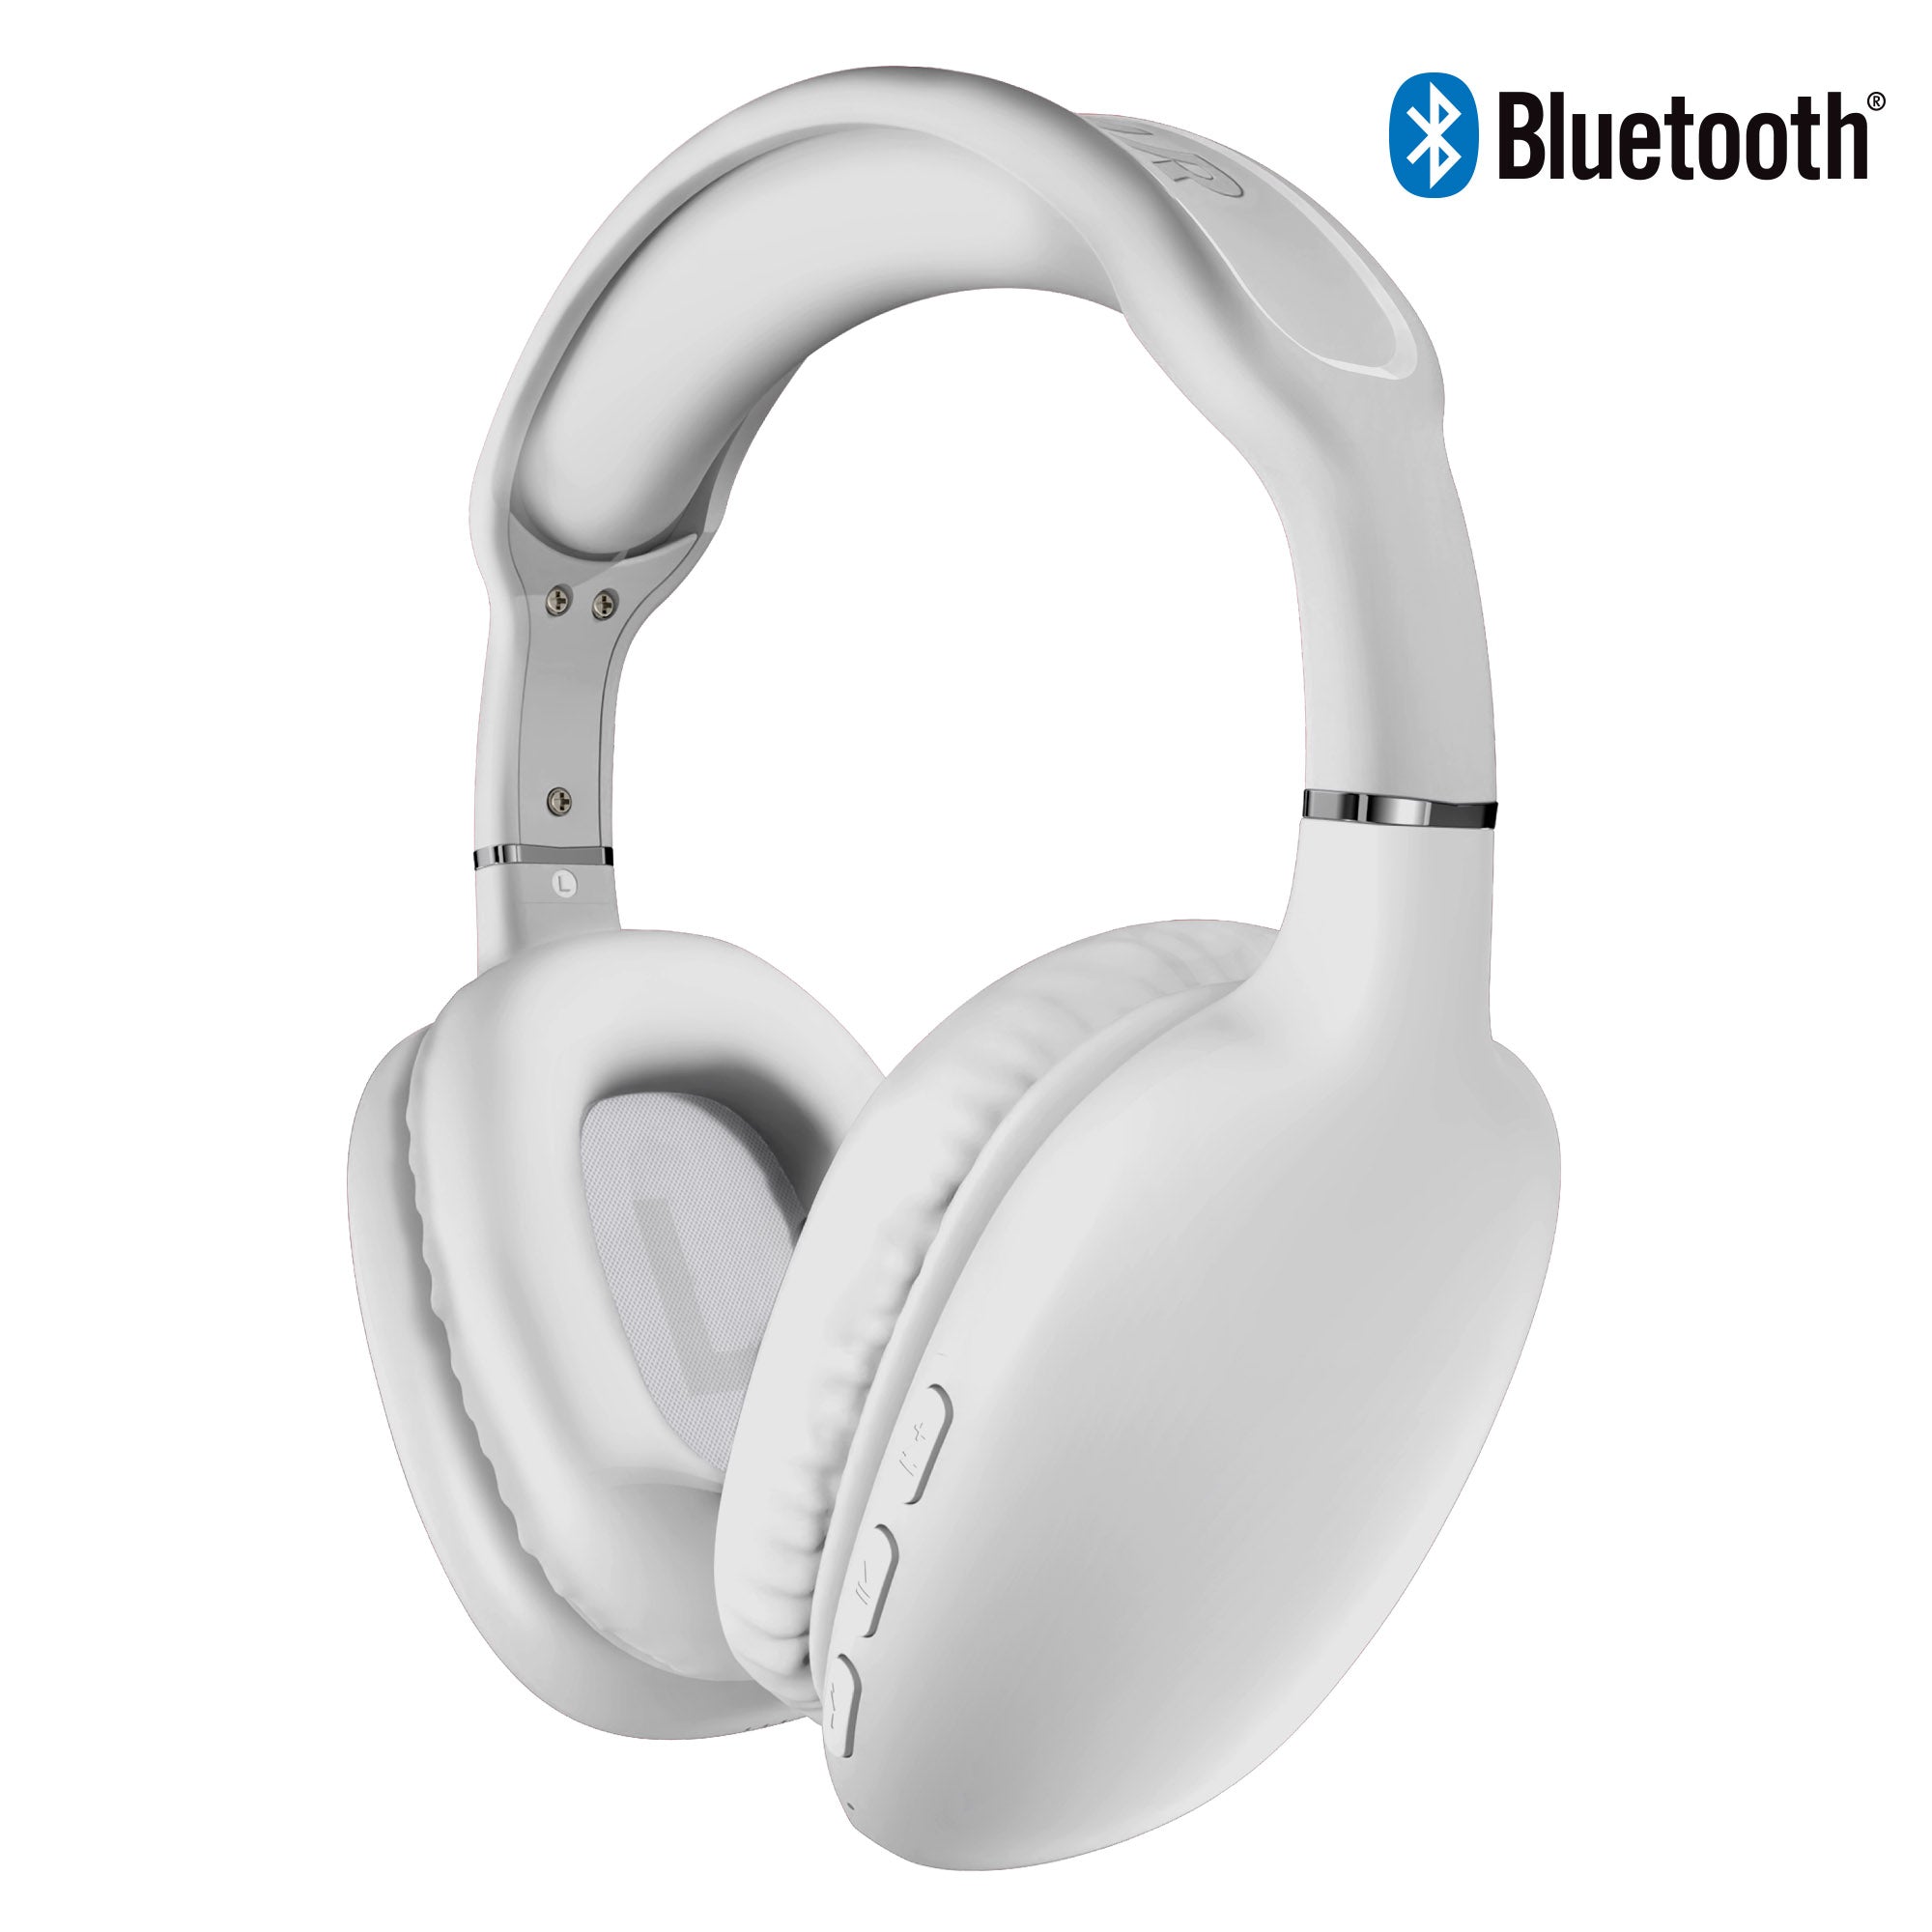 SoundPlay Foldable Wireless Headphones, Bluetooth Over-Ear Headset with  Built-in Mic, White